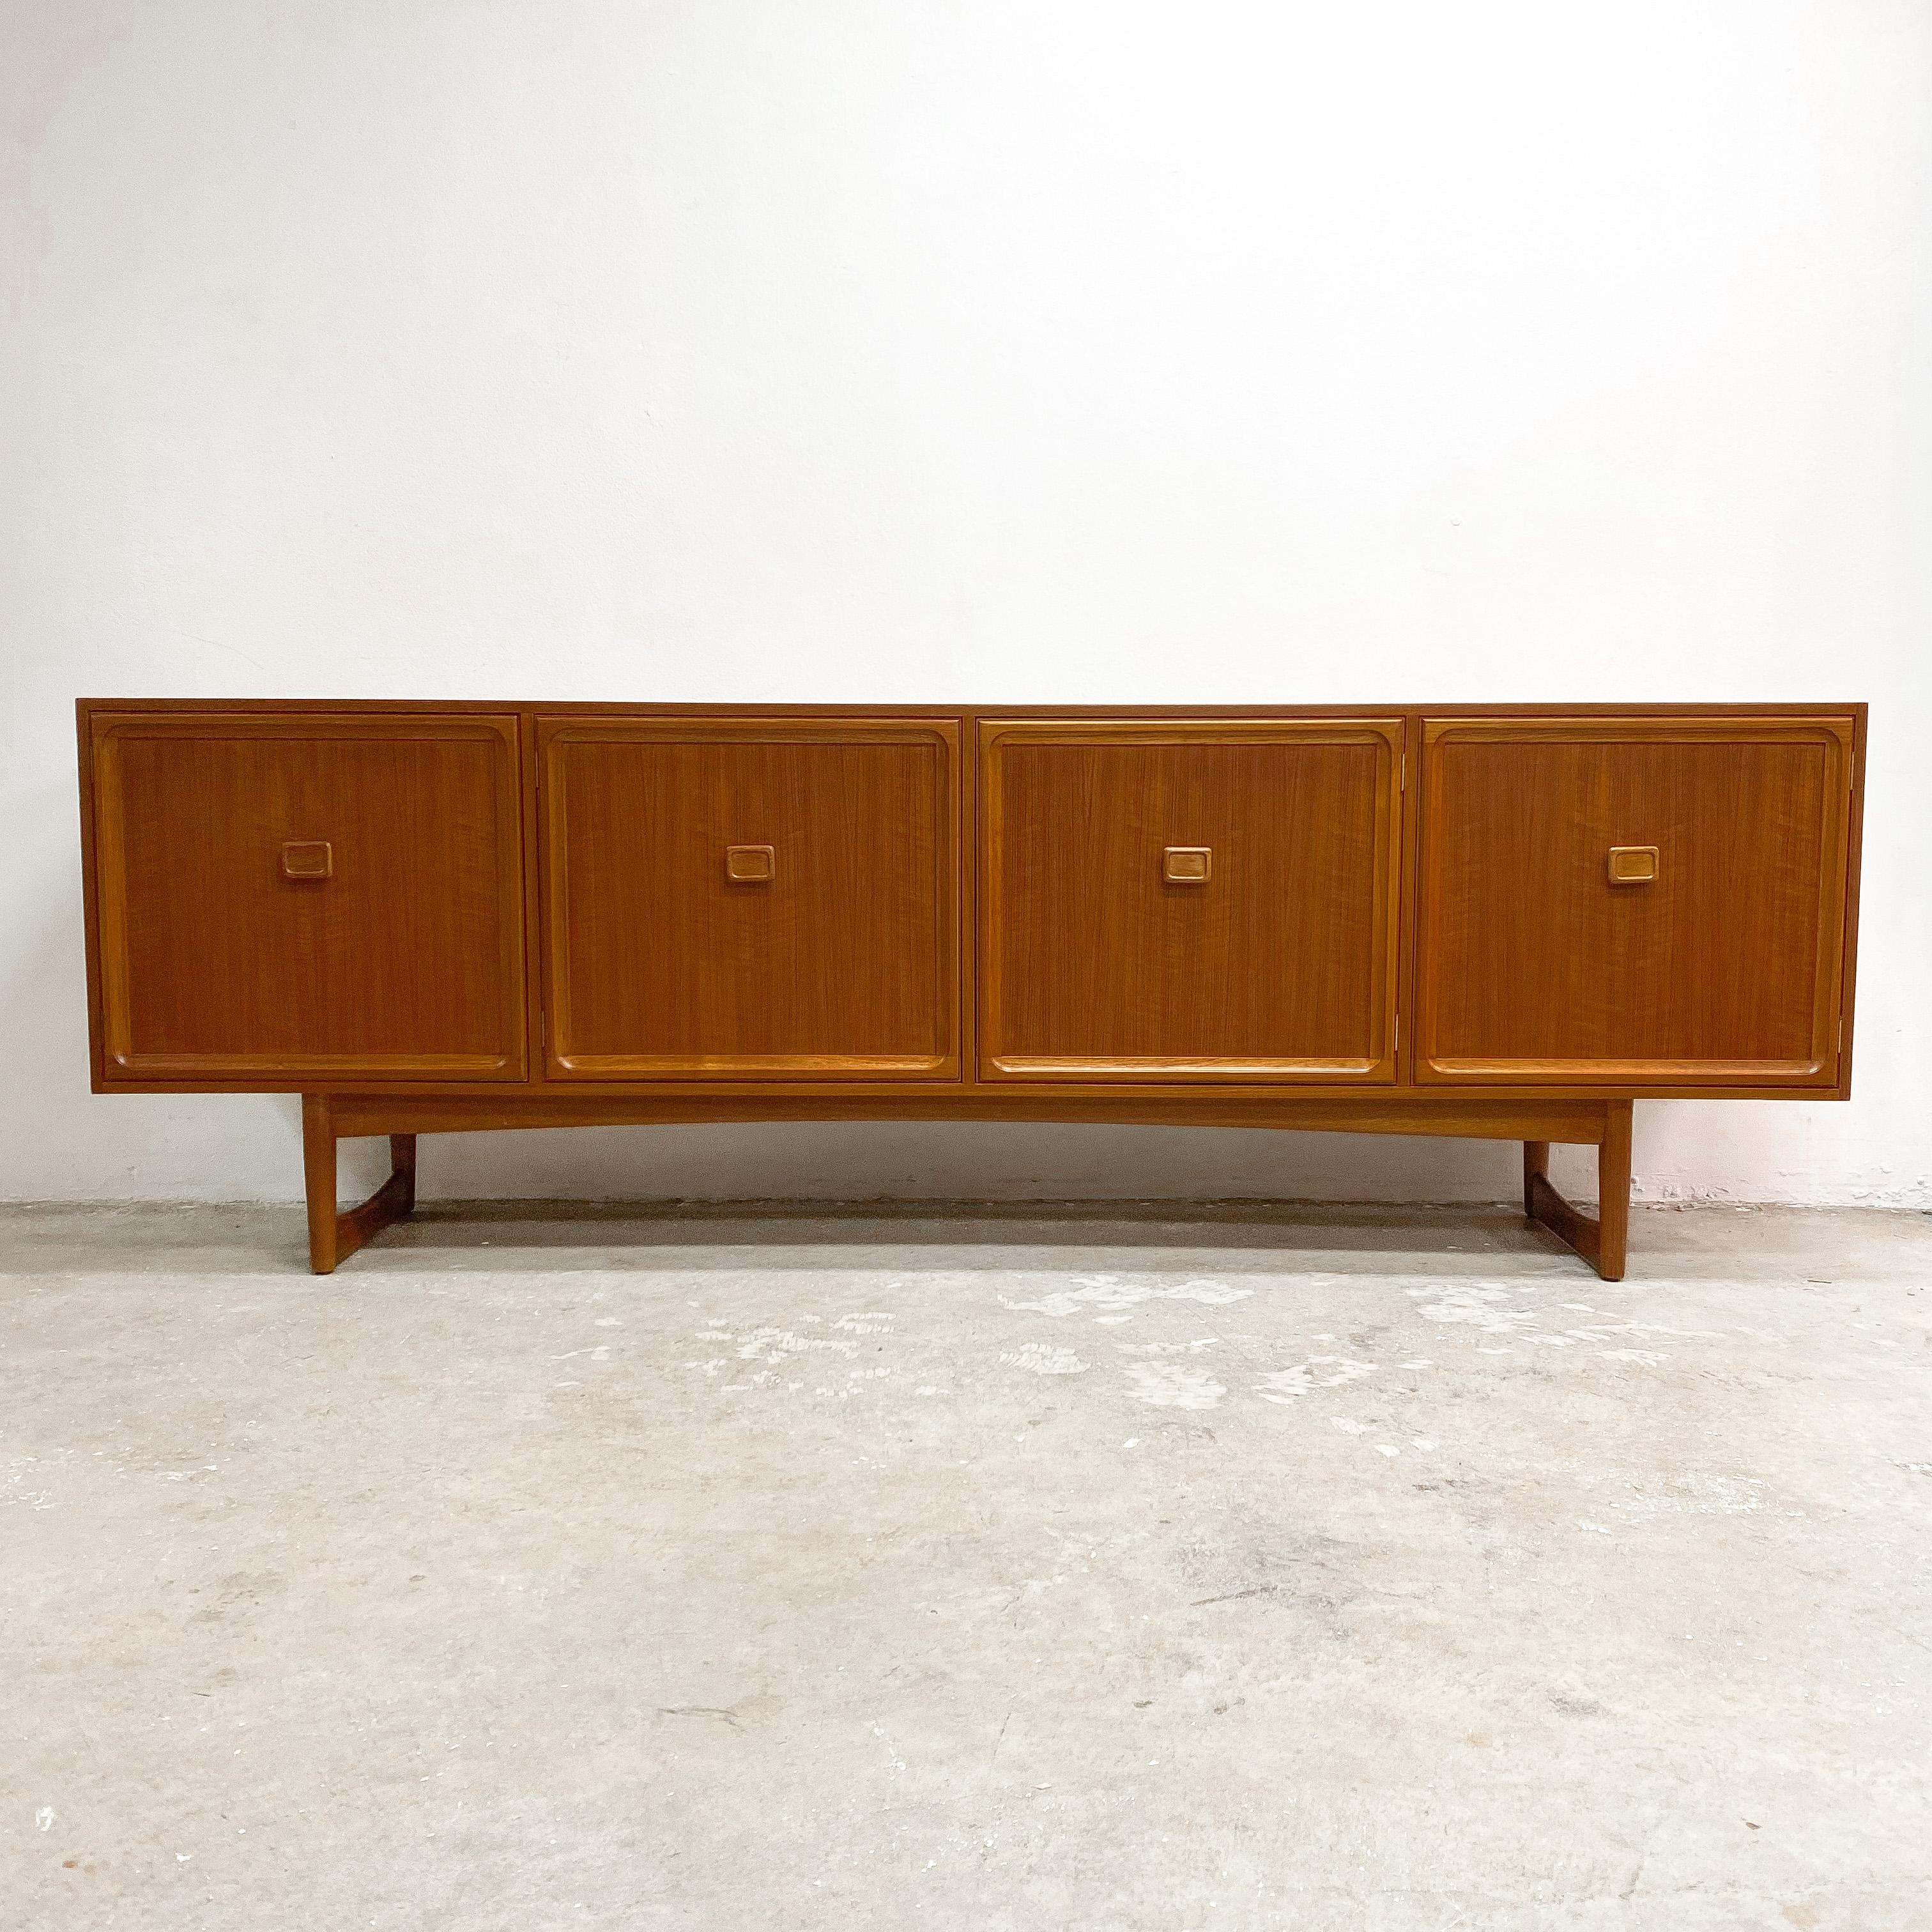 Mid century modern Australian Brand Parker teak sideboard, with square handles and sculptured sleigh legs. The extra long length offers plenty of storage. A timeless elegant piece, circa early 1970s. In great condition and has been professionally